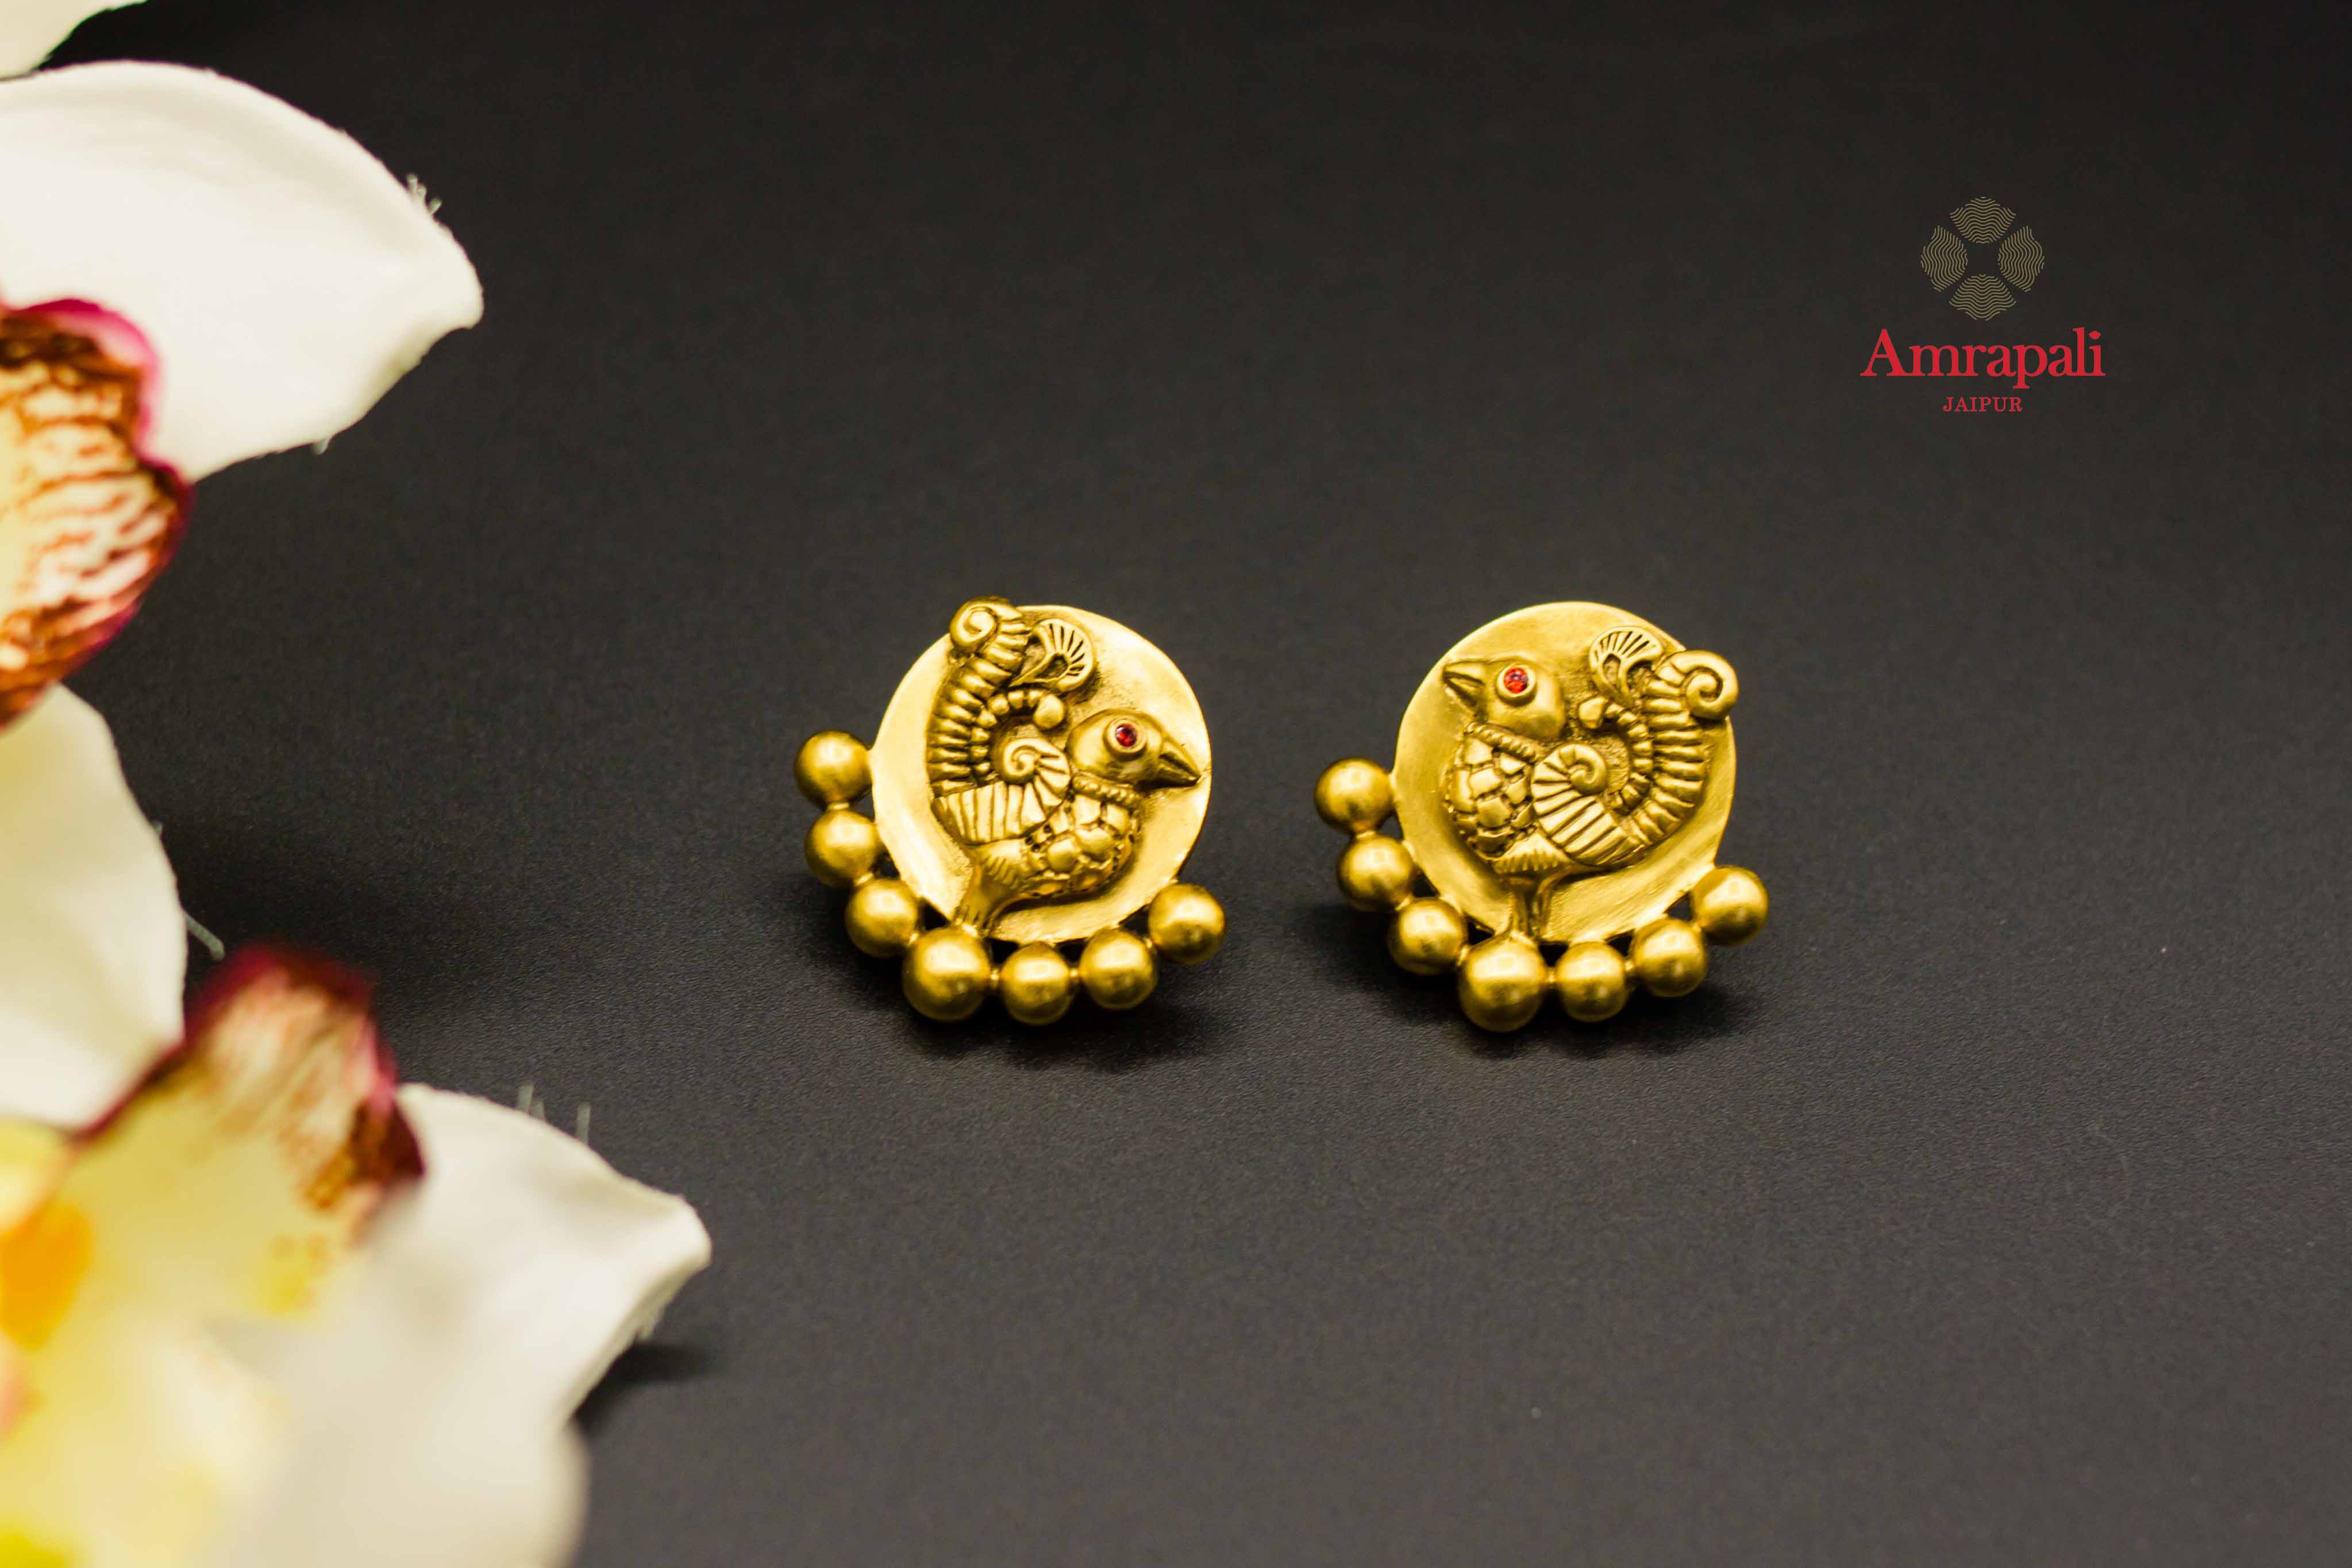 Buy Amrapali peacock design silver gold plated stud earrings online in USA. Raise your ethnic style quotient on special occasions with exquisite Indian jewelry from Pure Elegance Indian clothing store in USA. Enhance your Indian look with silver gold plated jewelry, necklaces, fashion jewelry available online.-flatlay